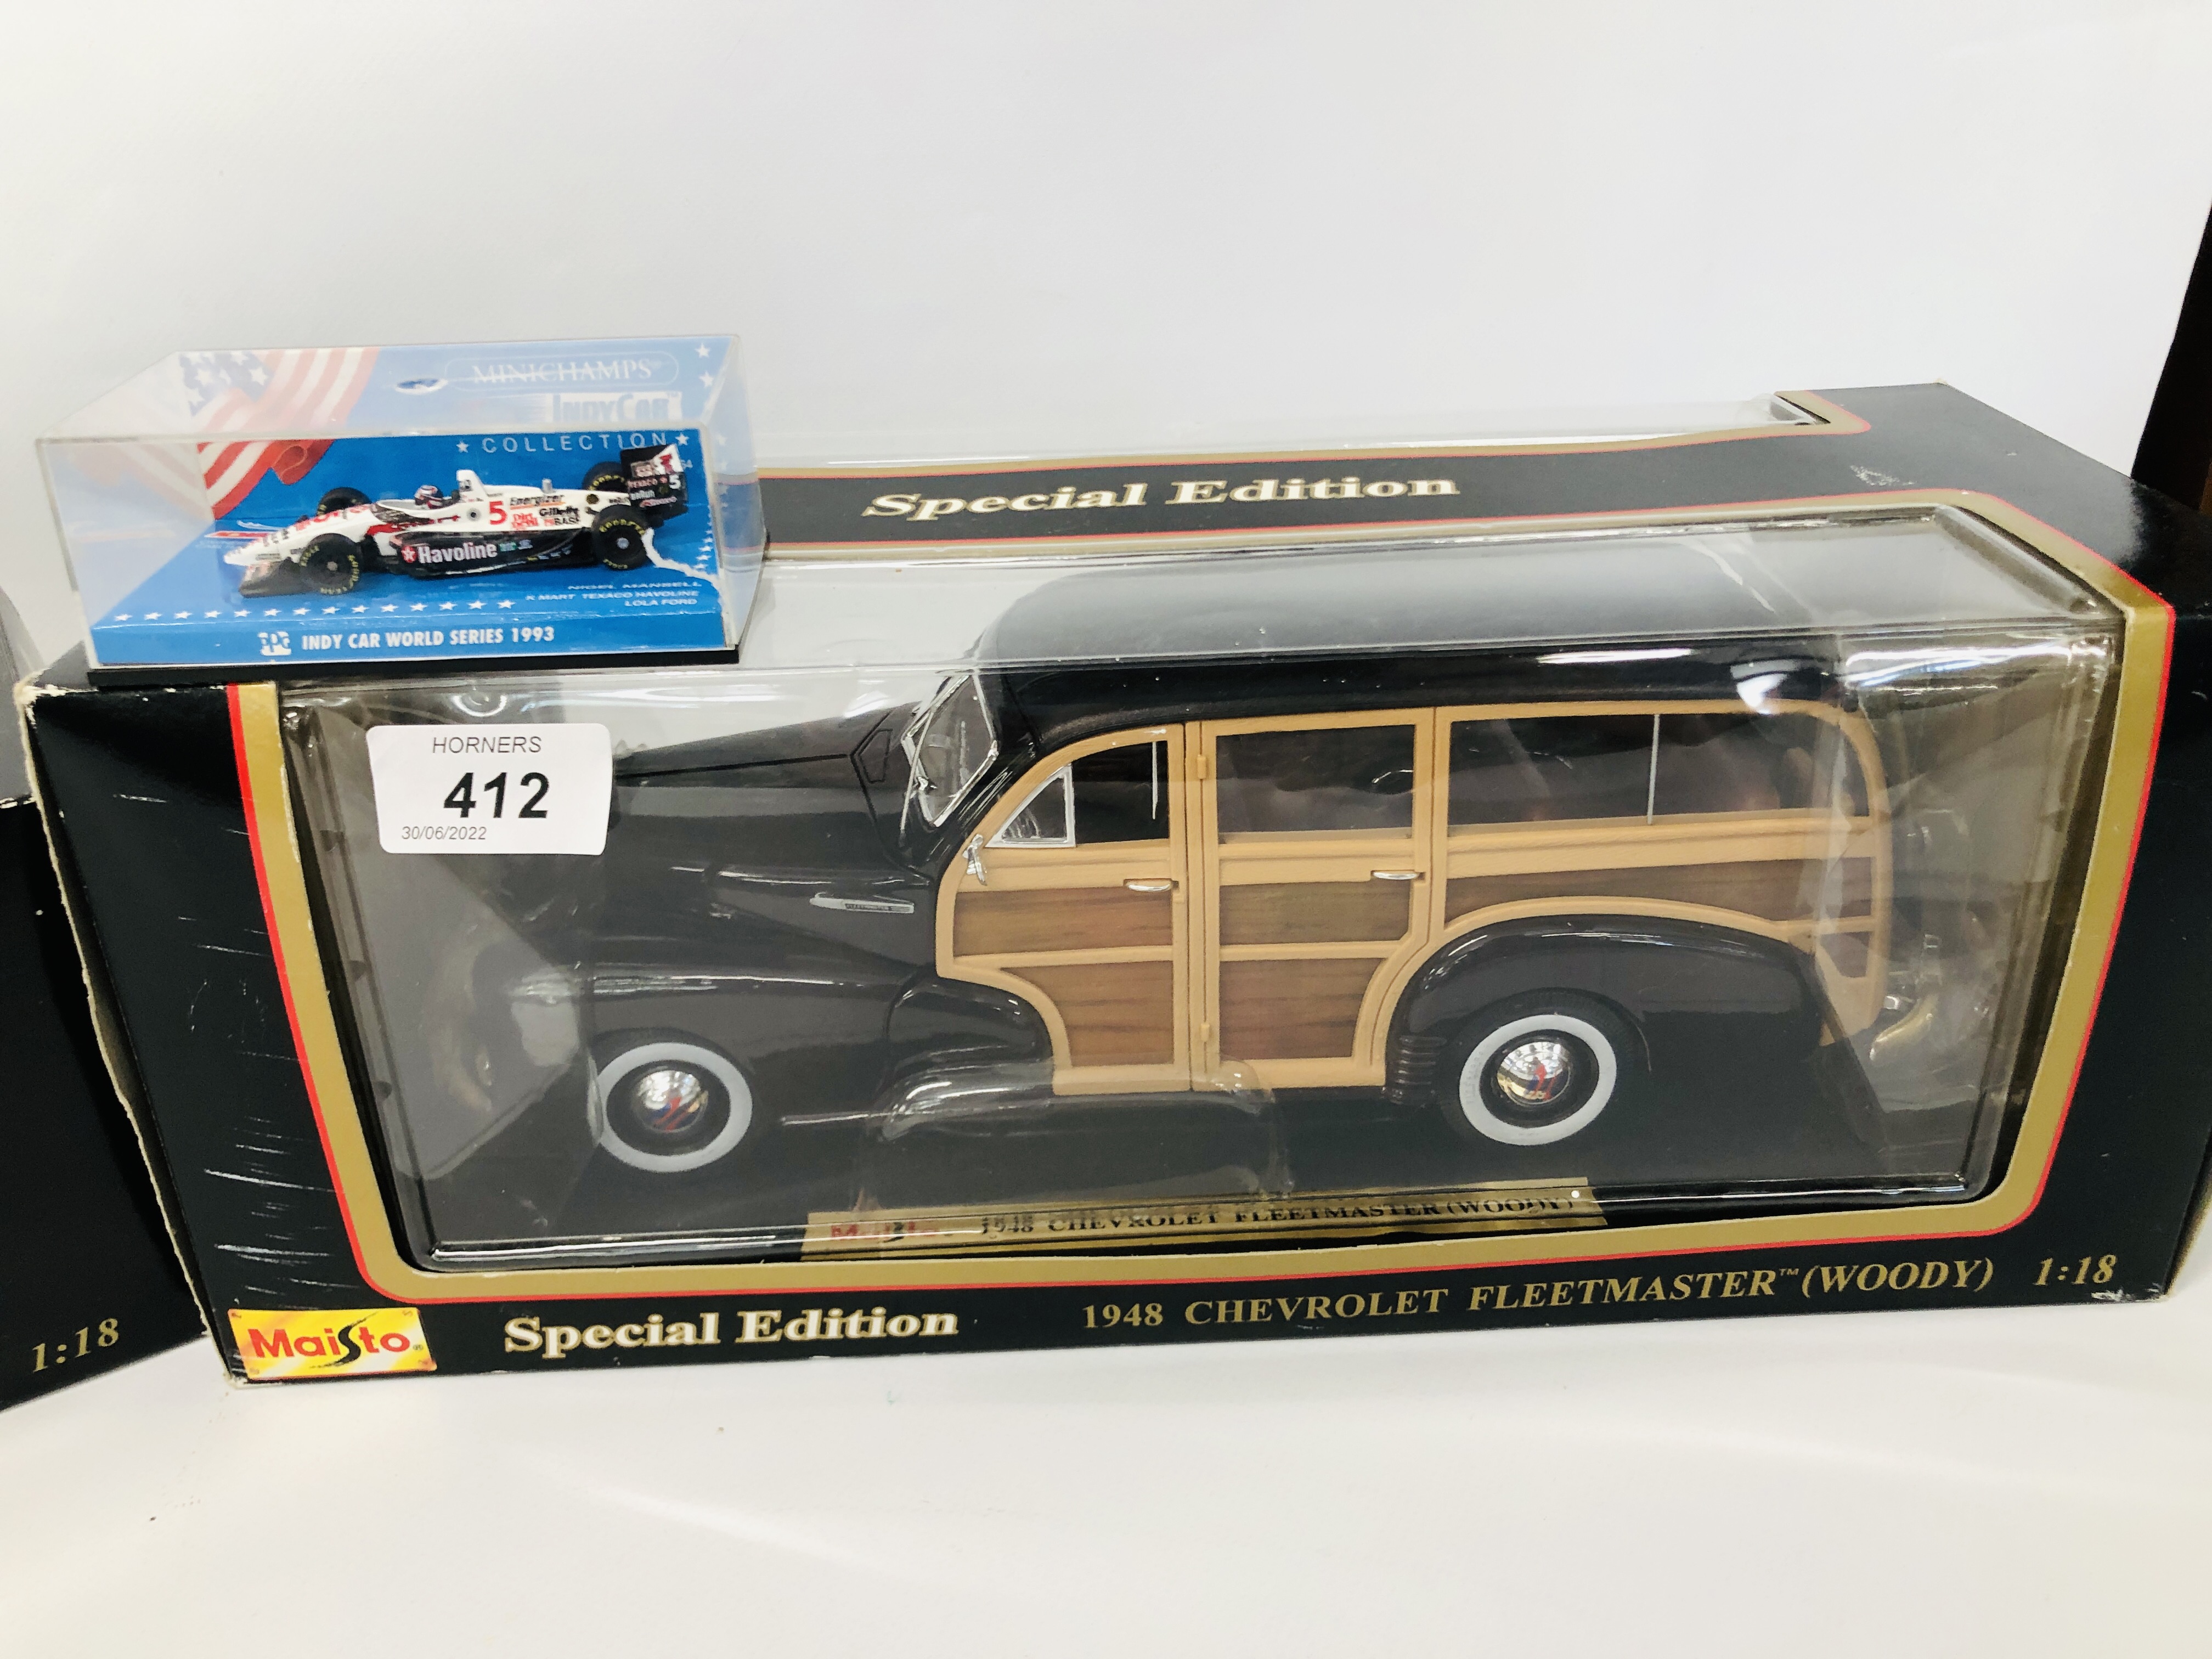 2 BOXED MAISTO SPECIAL EDITION 1:18 VEHICLES TO INCLUDE 1948 CHEVROLET FLEETMASTER AND CADILLAC - Image 3 of 3